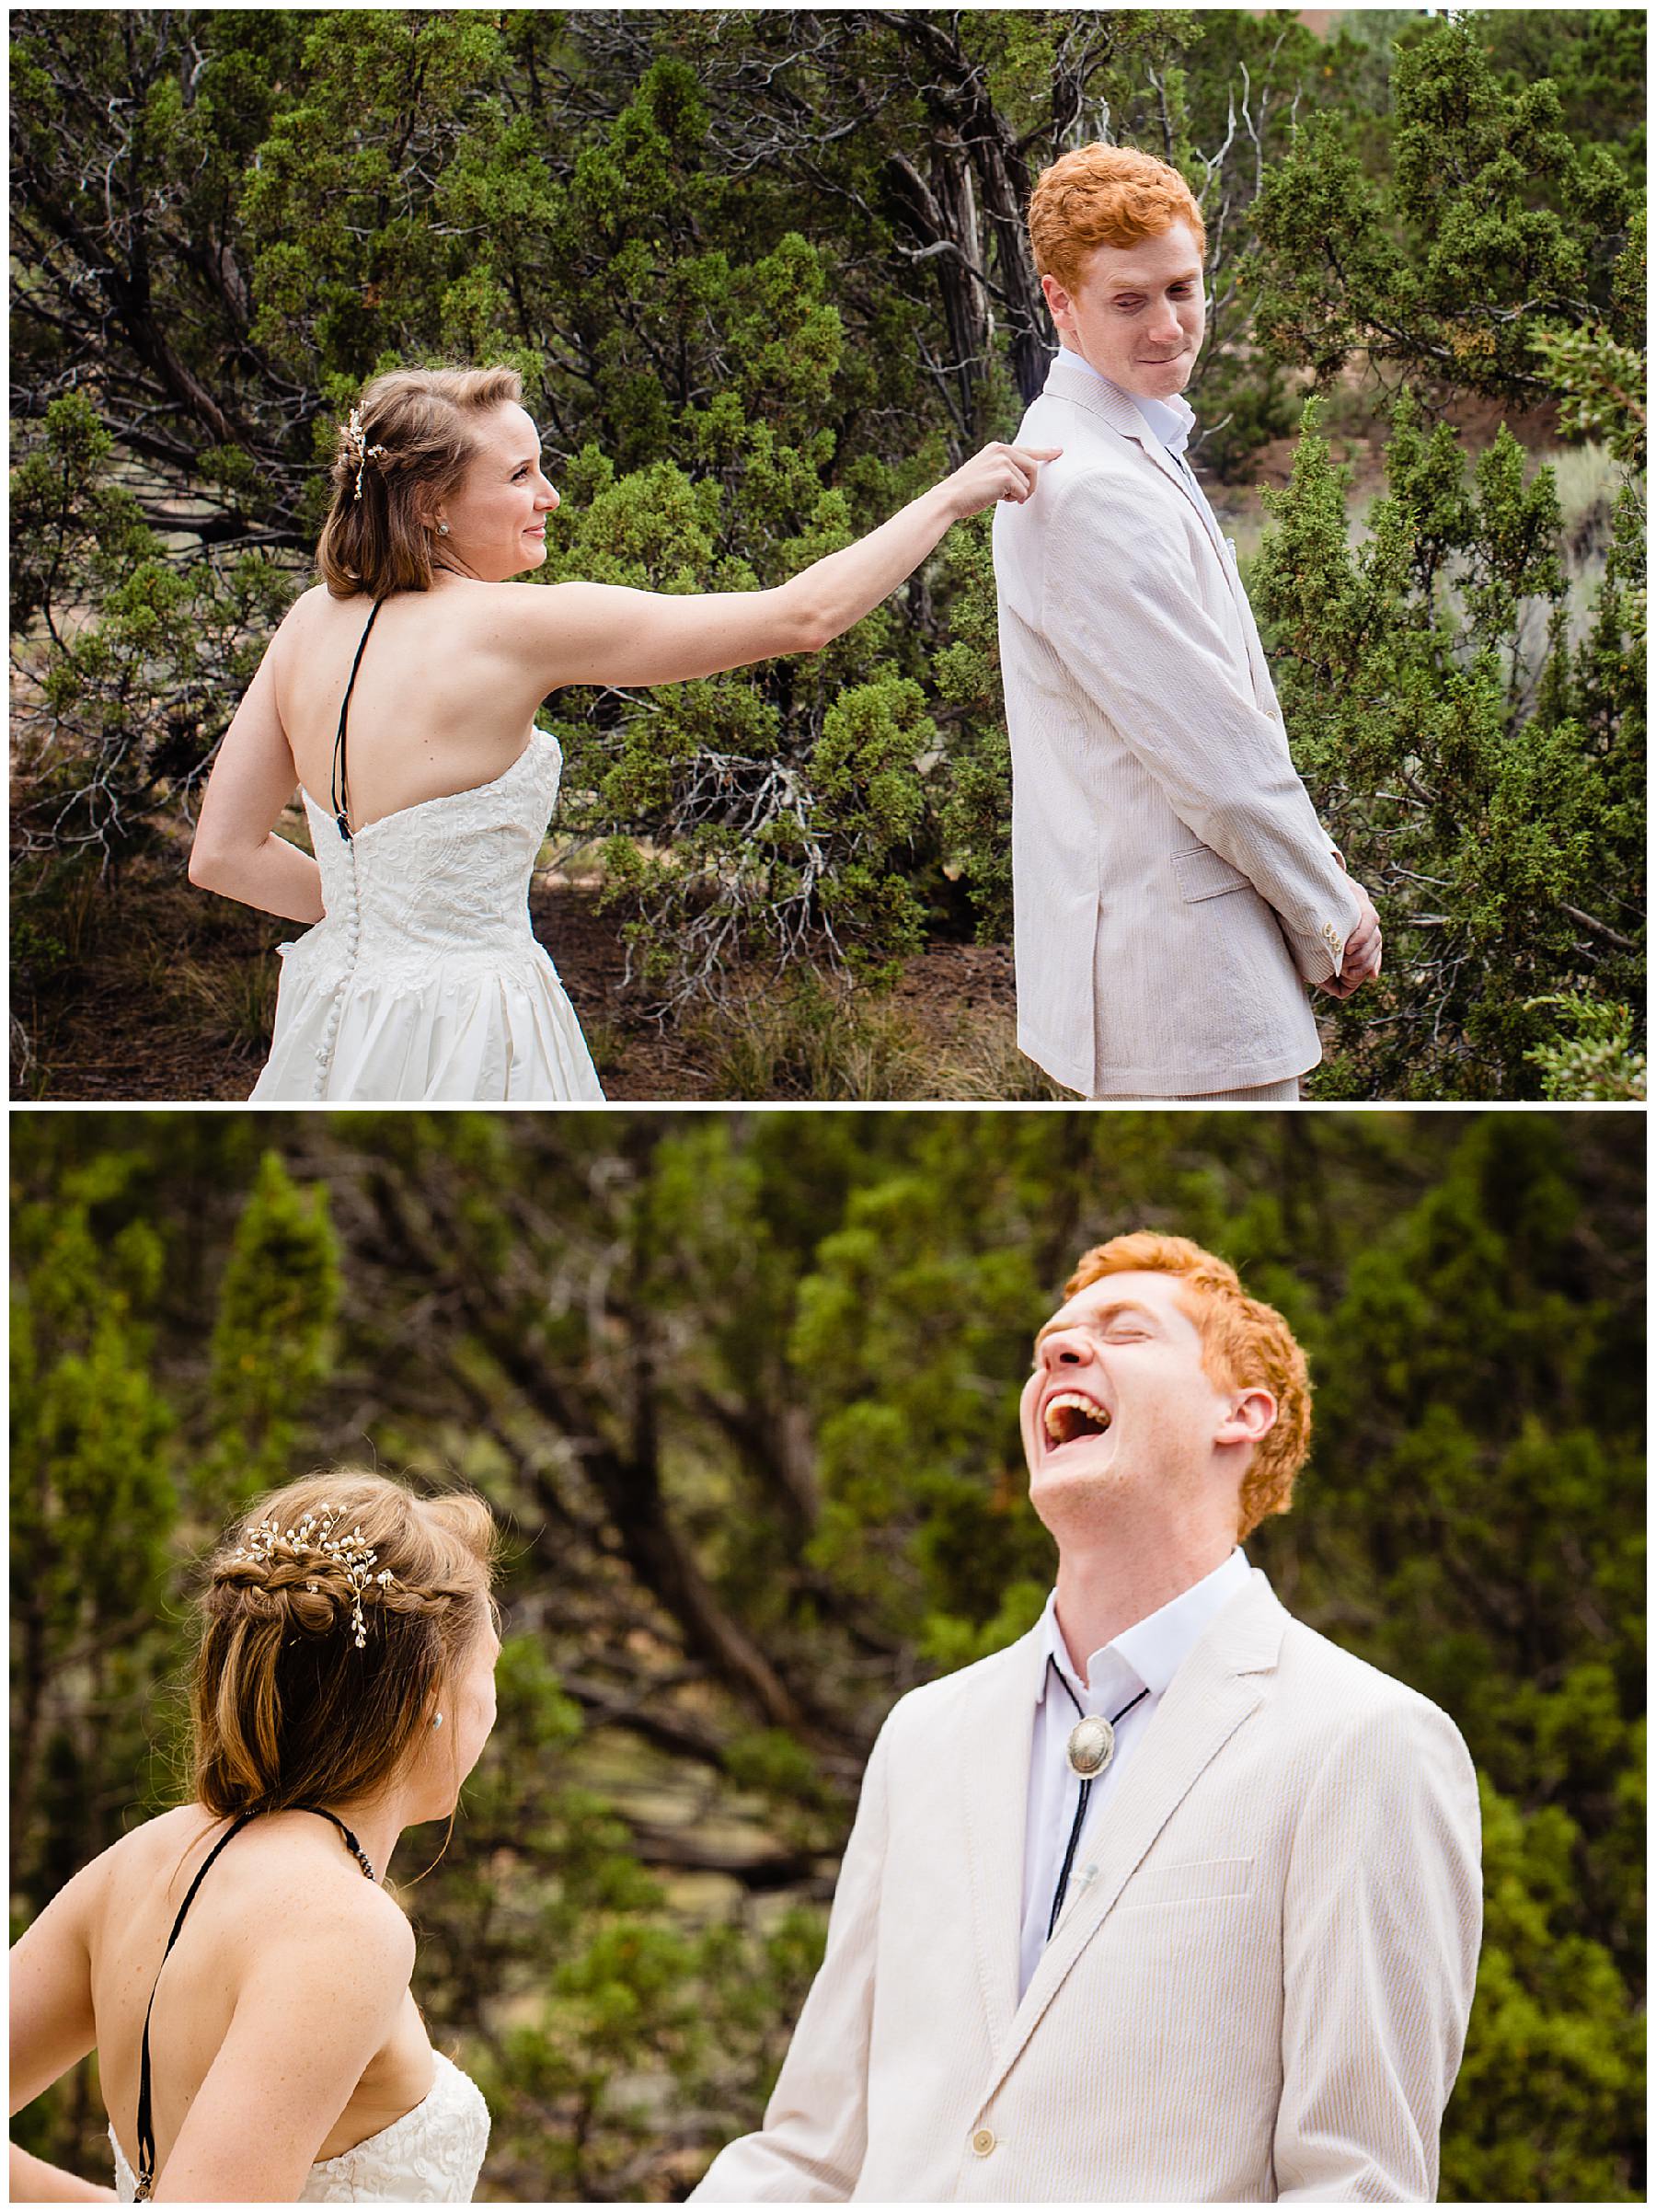 First look images from backyard wedding in Santa Fe